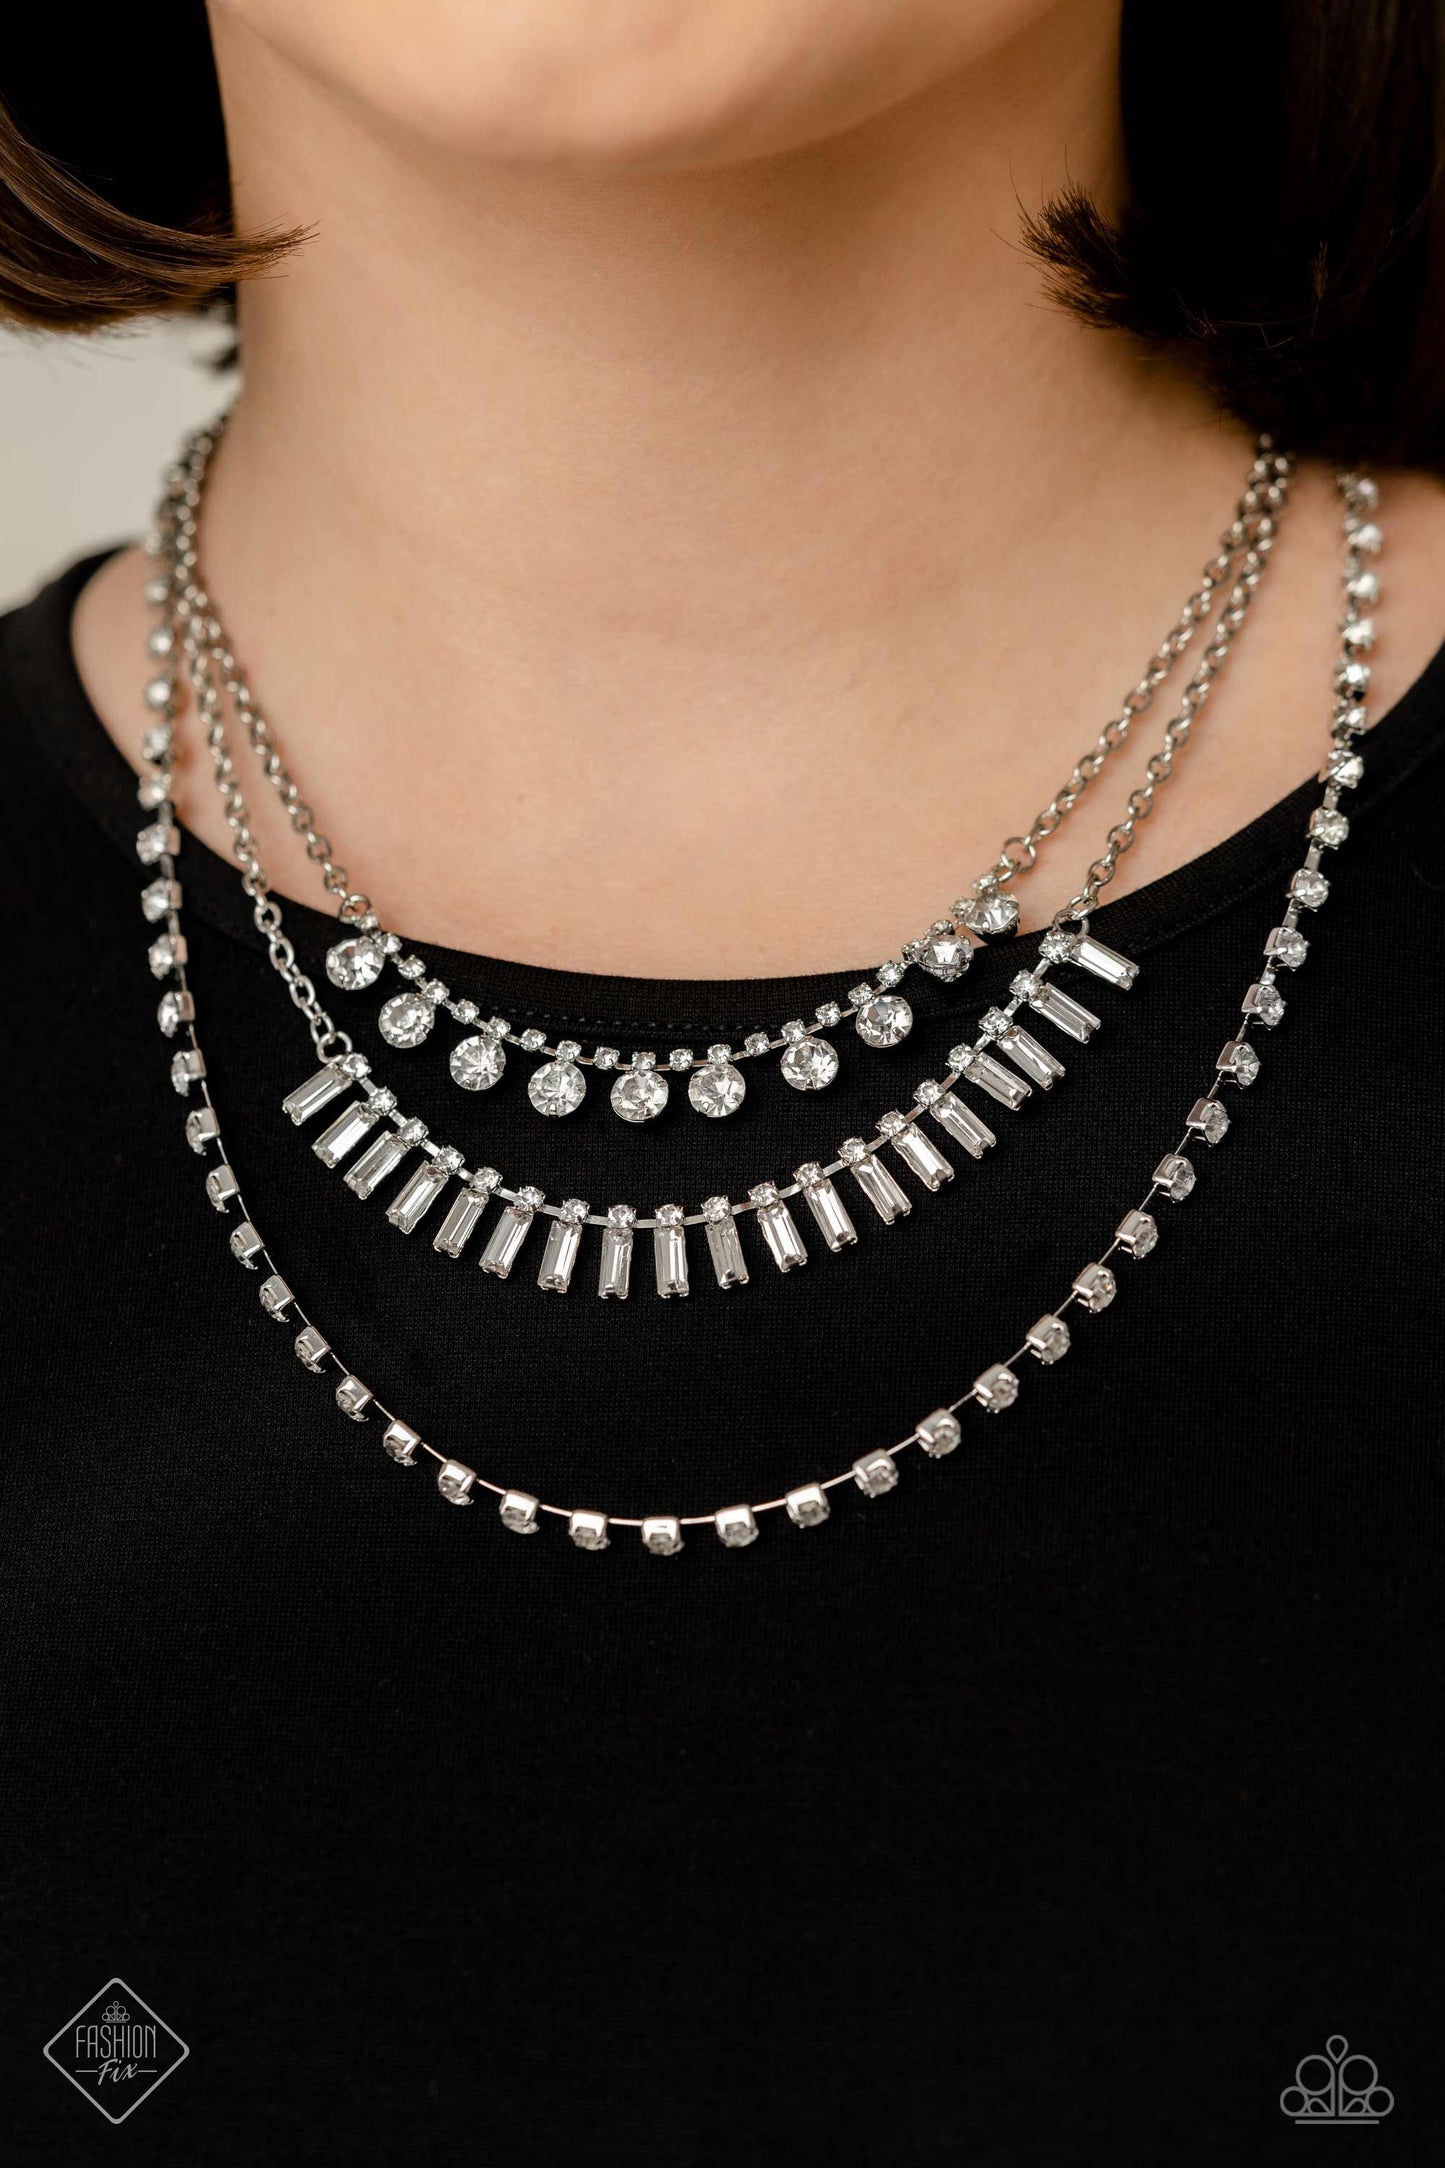 Paparazzi Necklaces - Dripping in Stardust - White - Fashion Fix